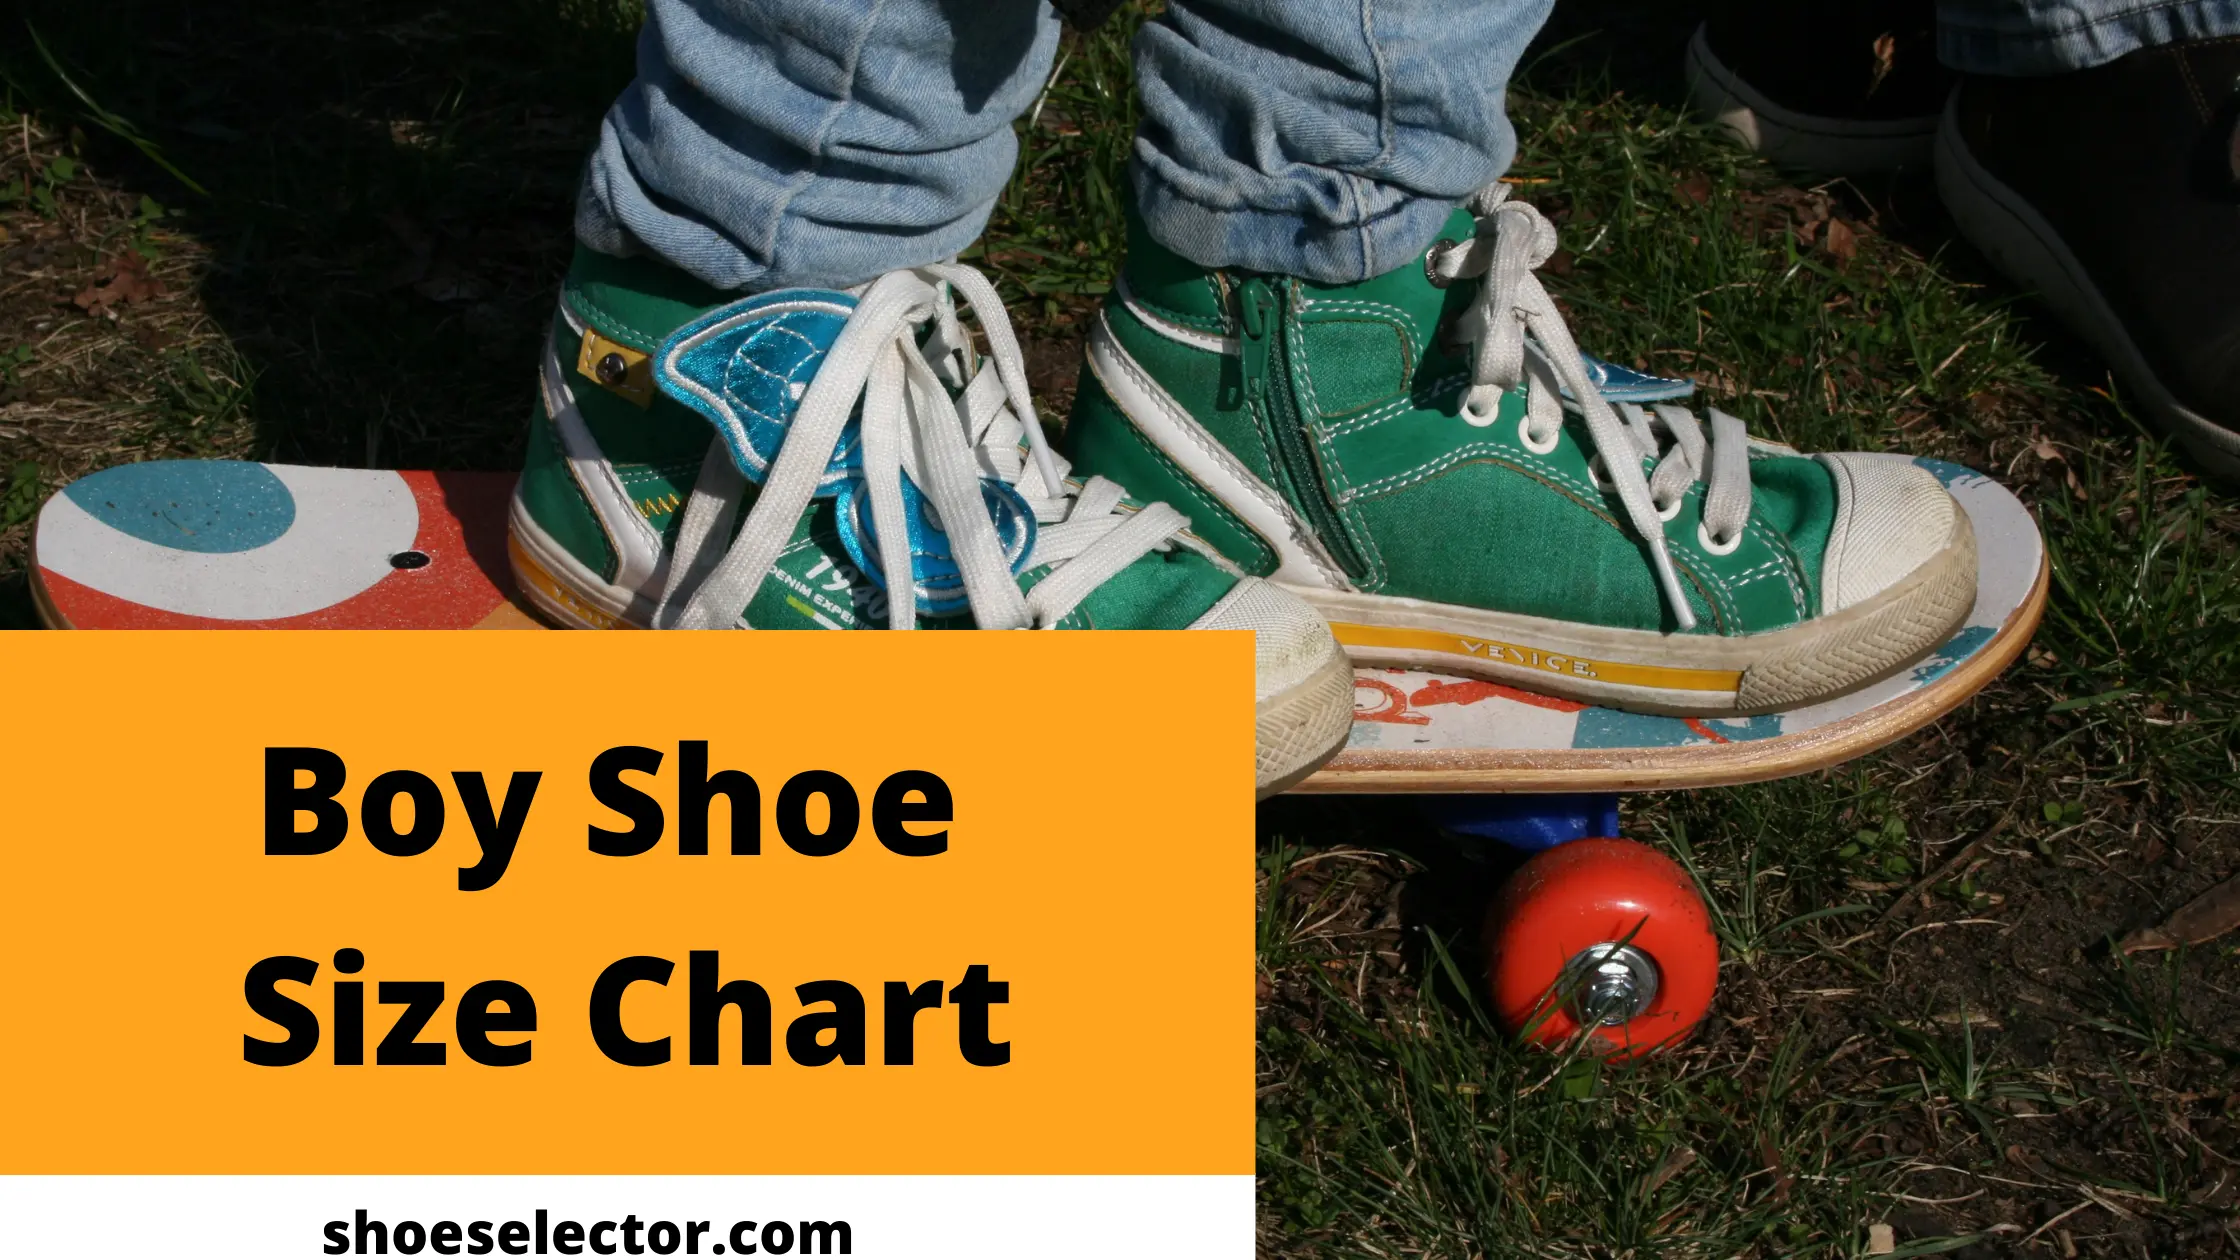 Boys Shoe Size Chart by Age - The Essential Guide